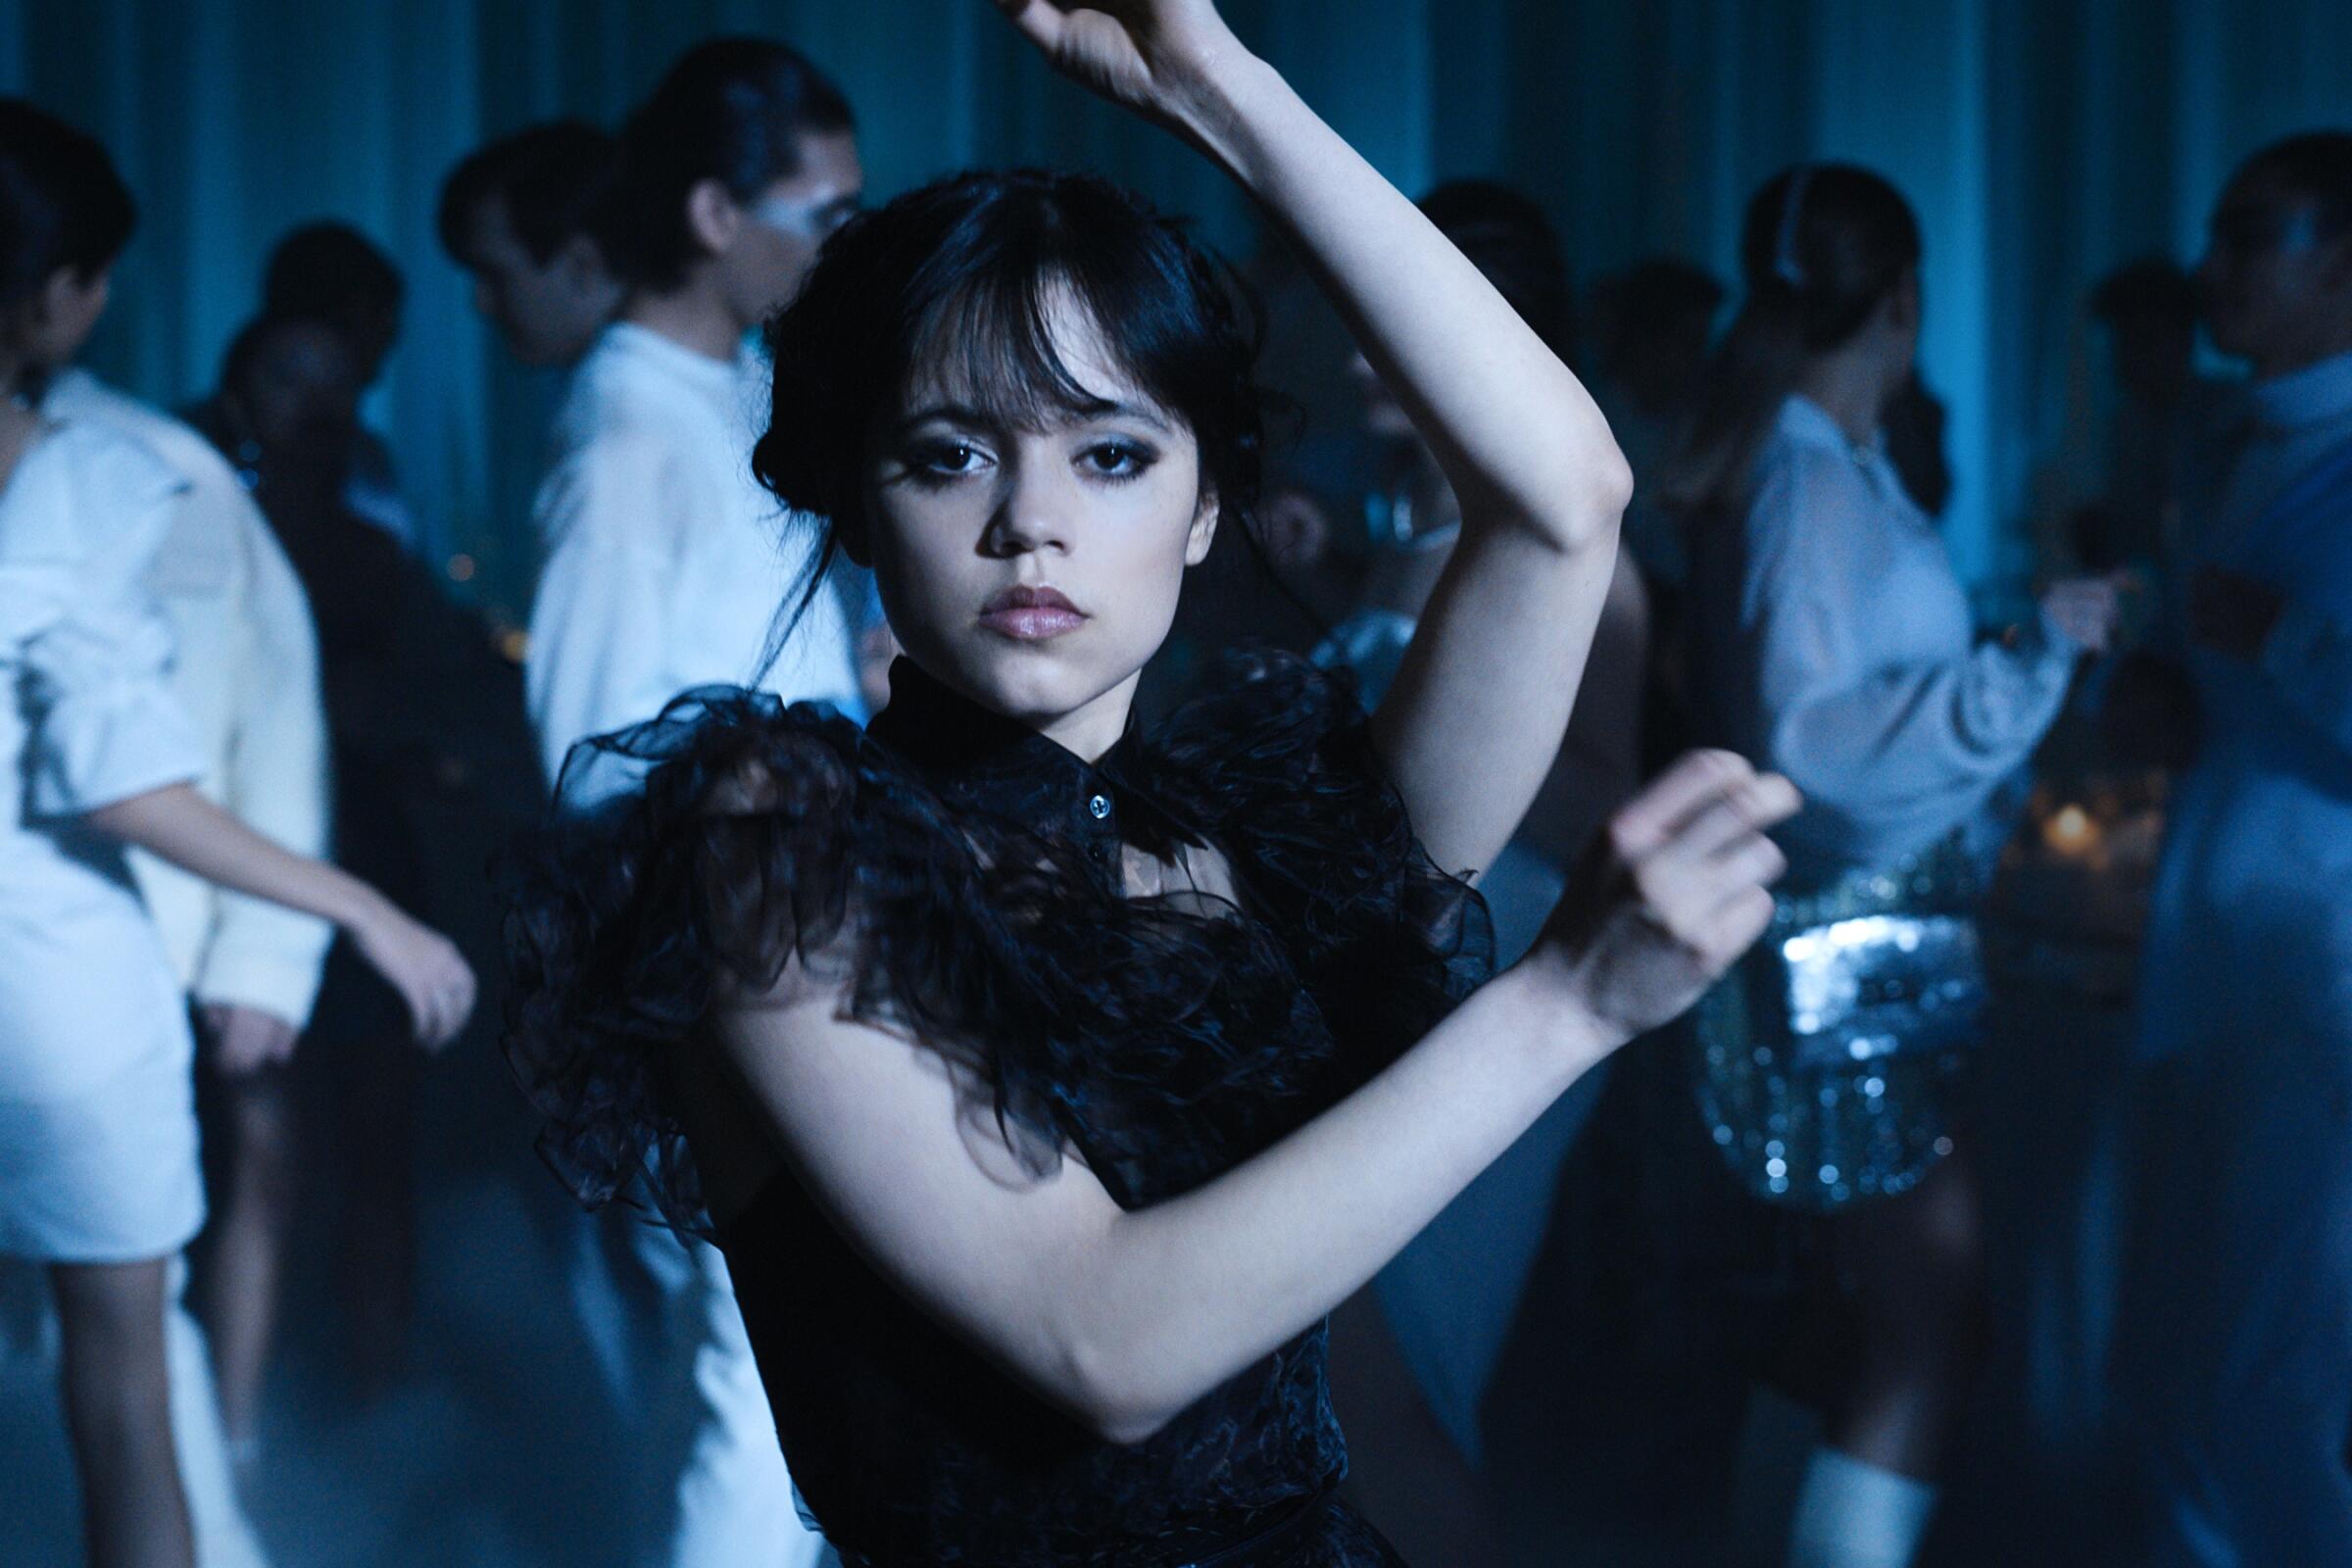 Jenna Ortega dances in a black party dress in a scene from "Wednesday."